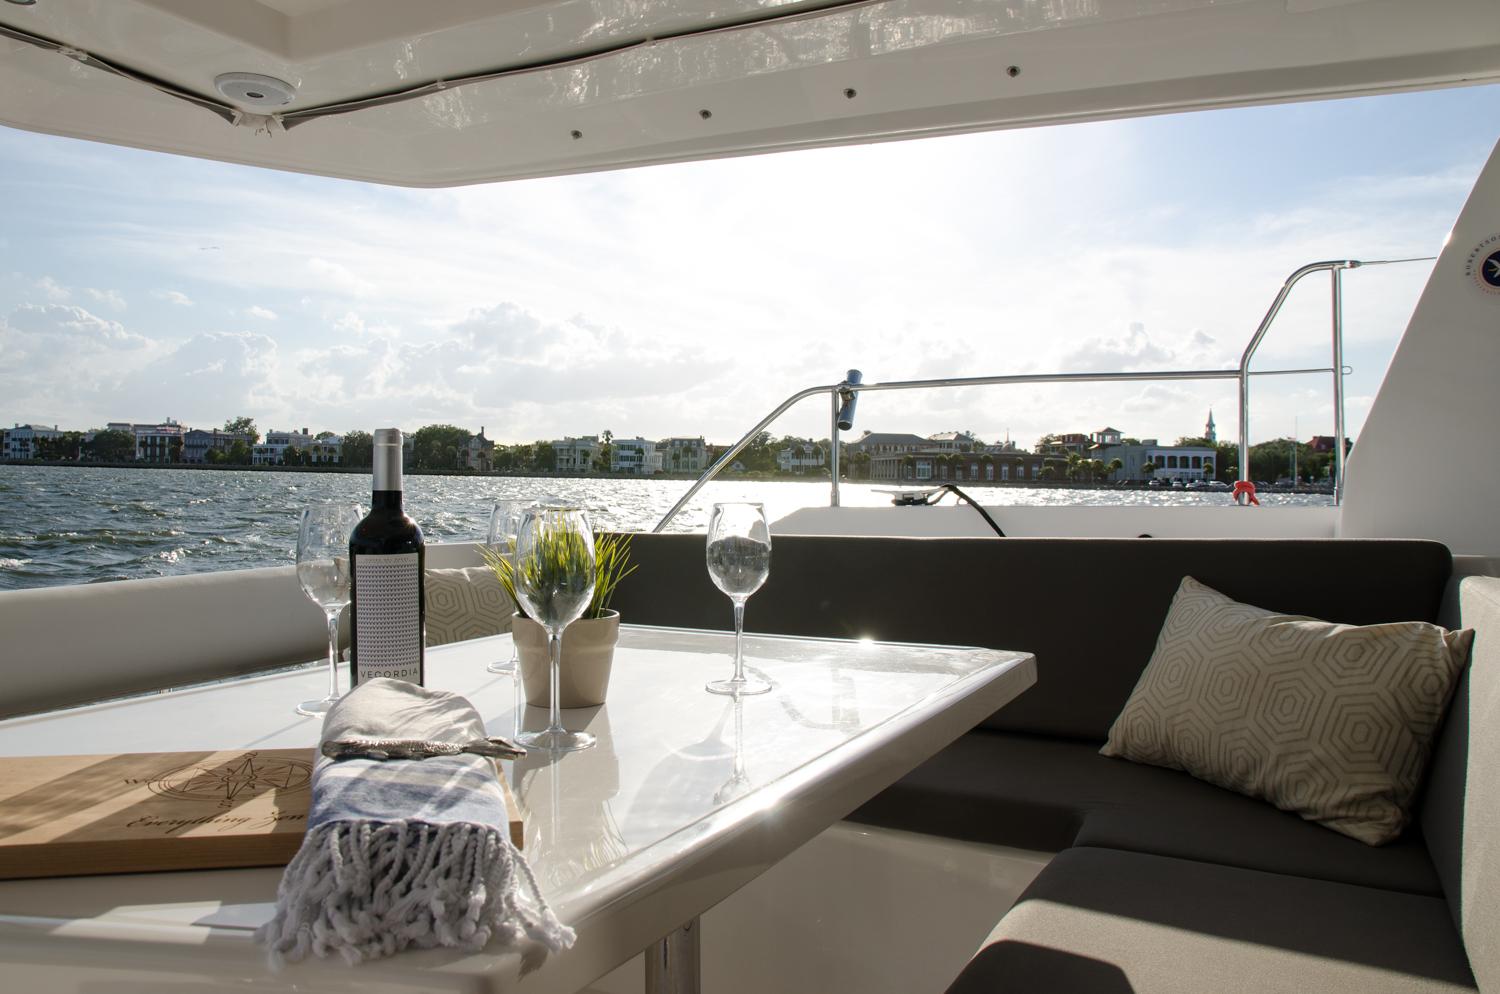 Enjoy a glass with friends on your Charleston catamaran charter.